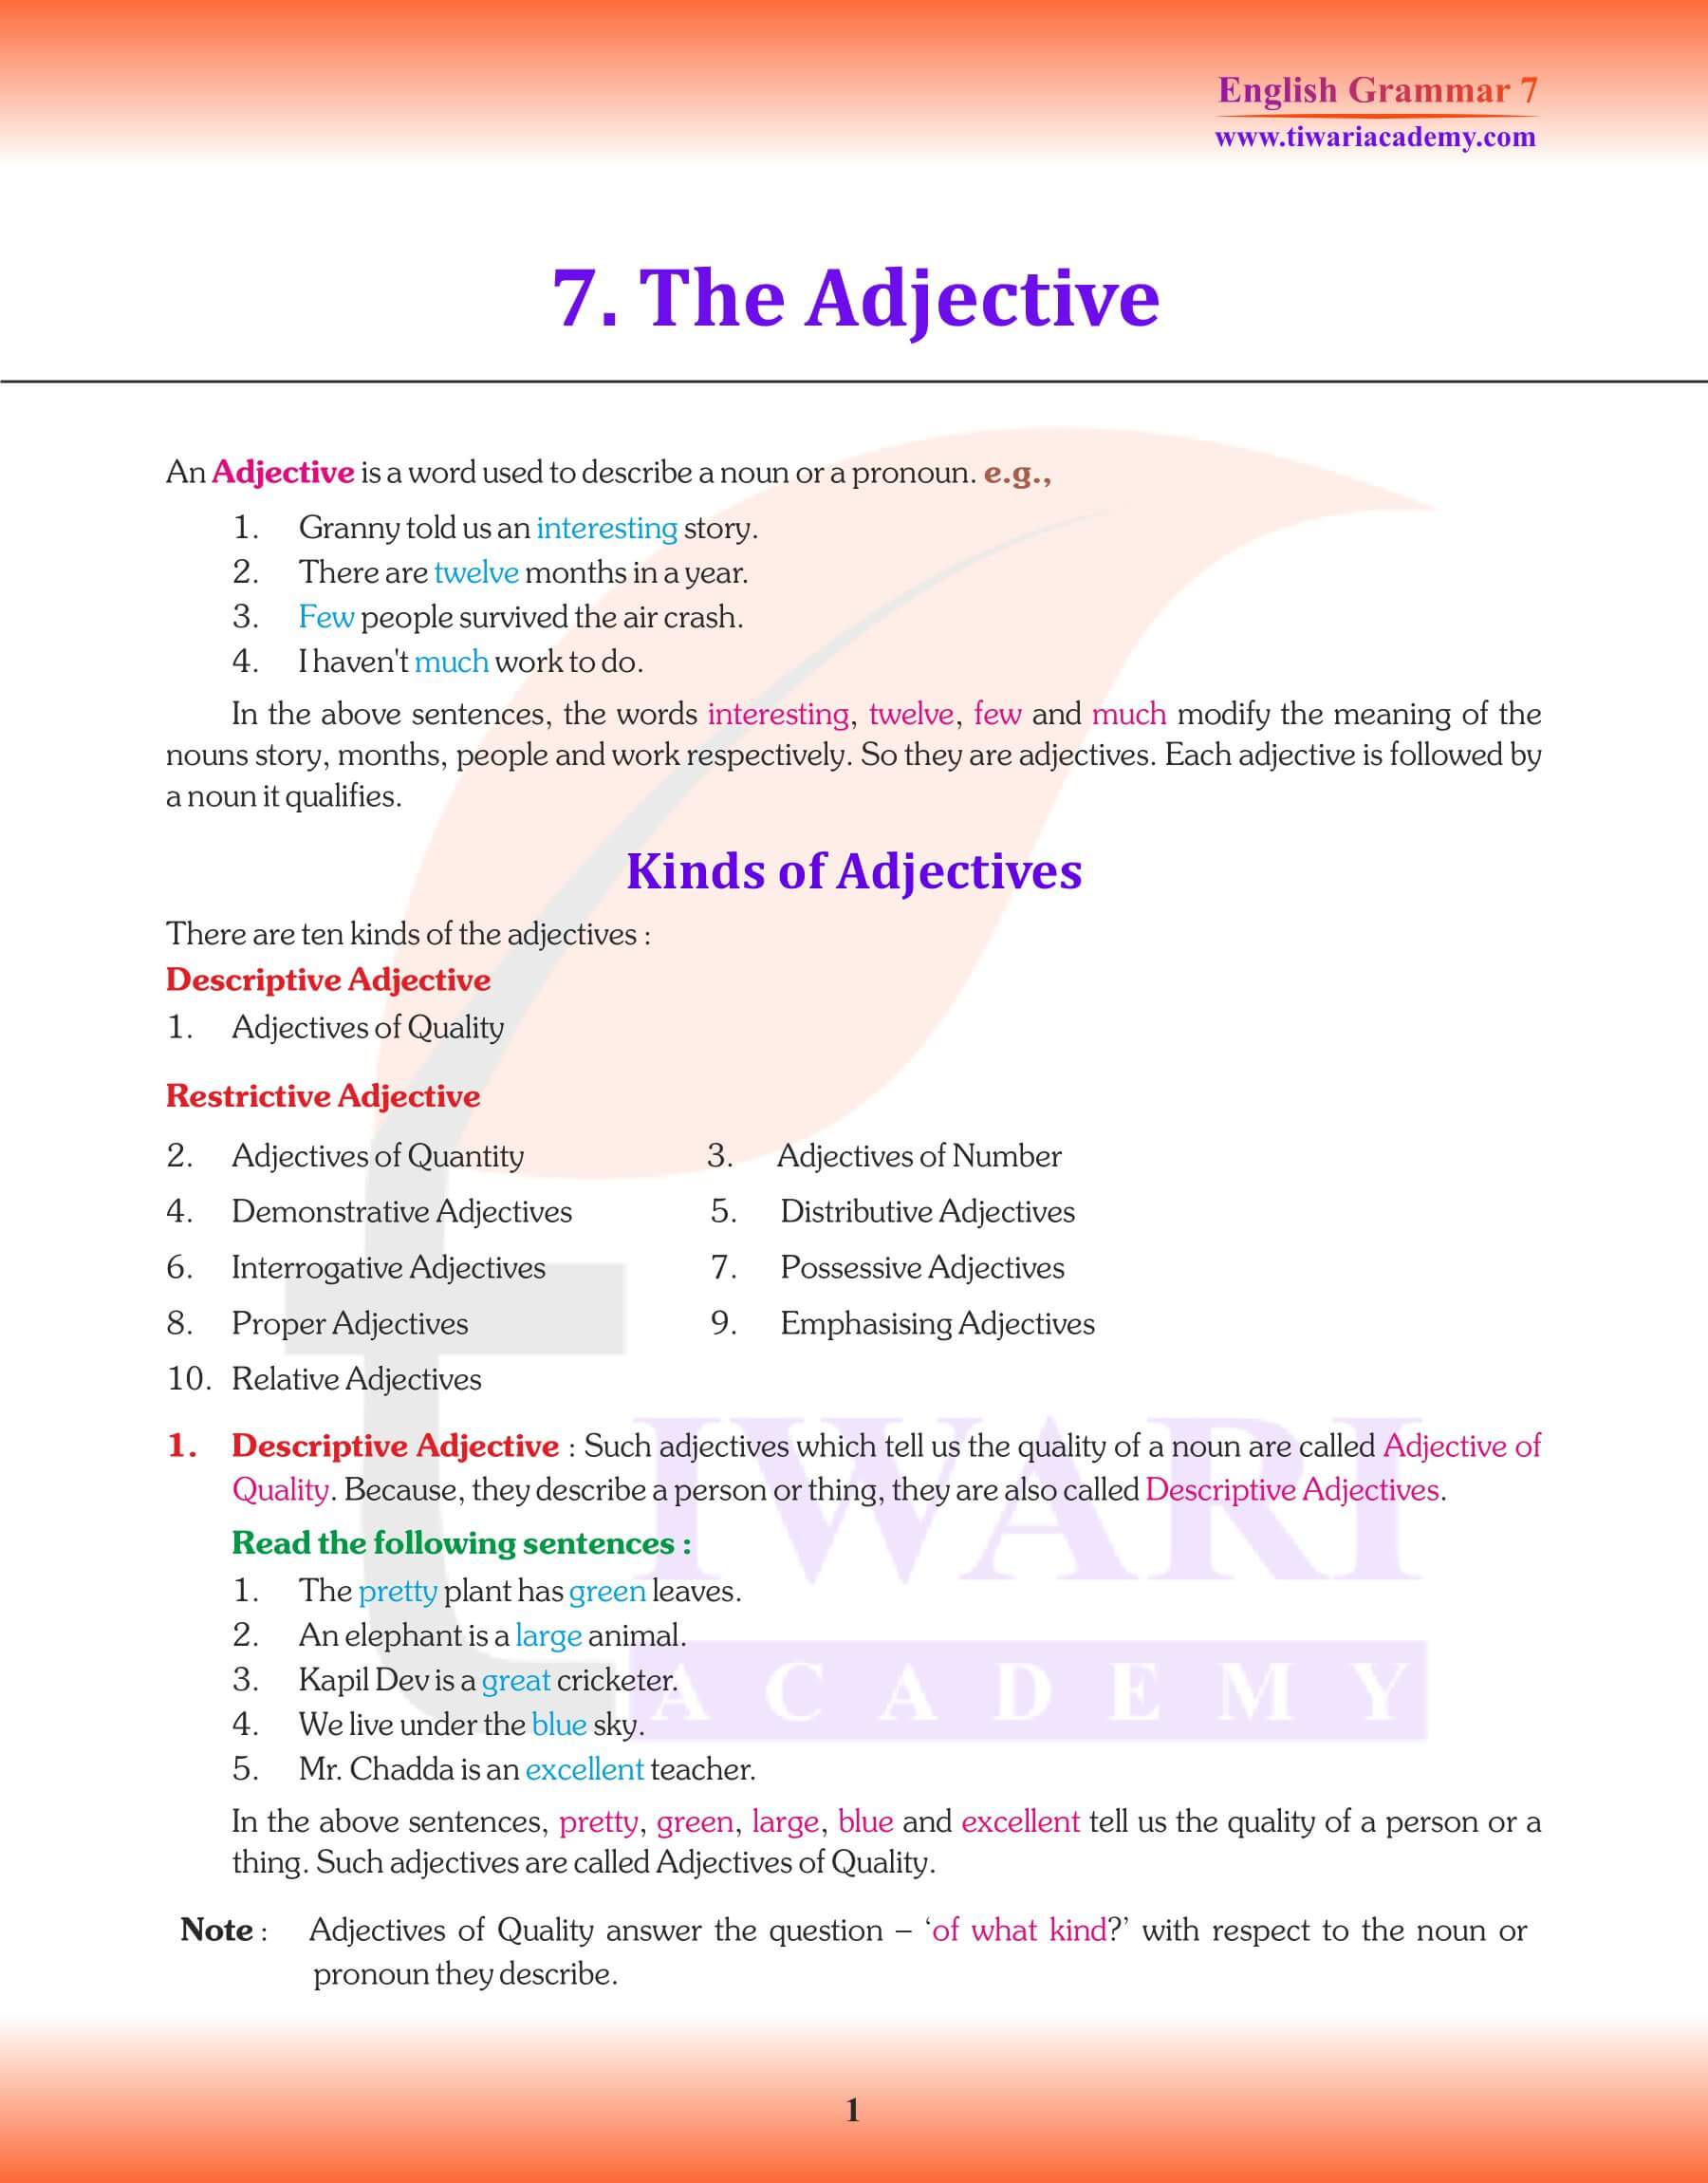 Class 7 English Grammar Chapter 7 Revision